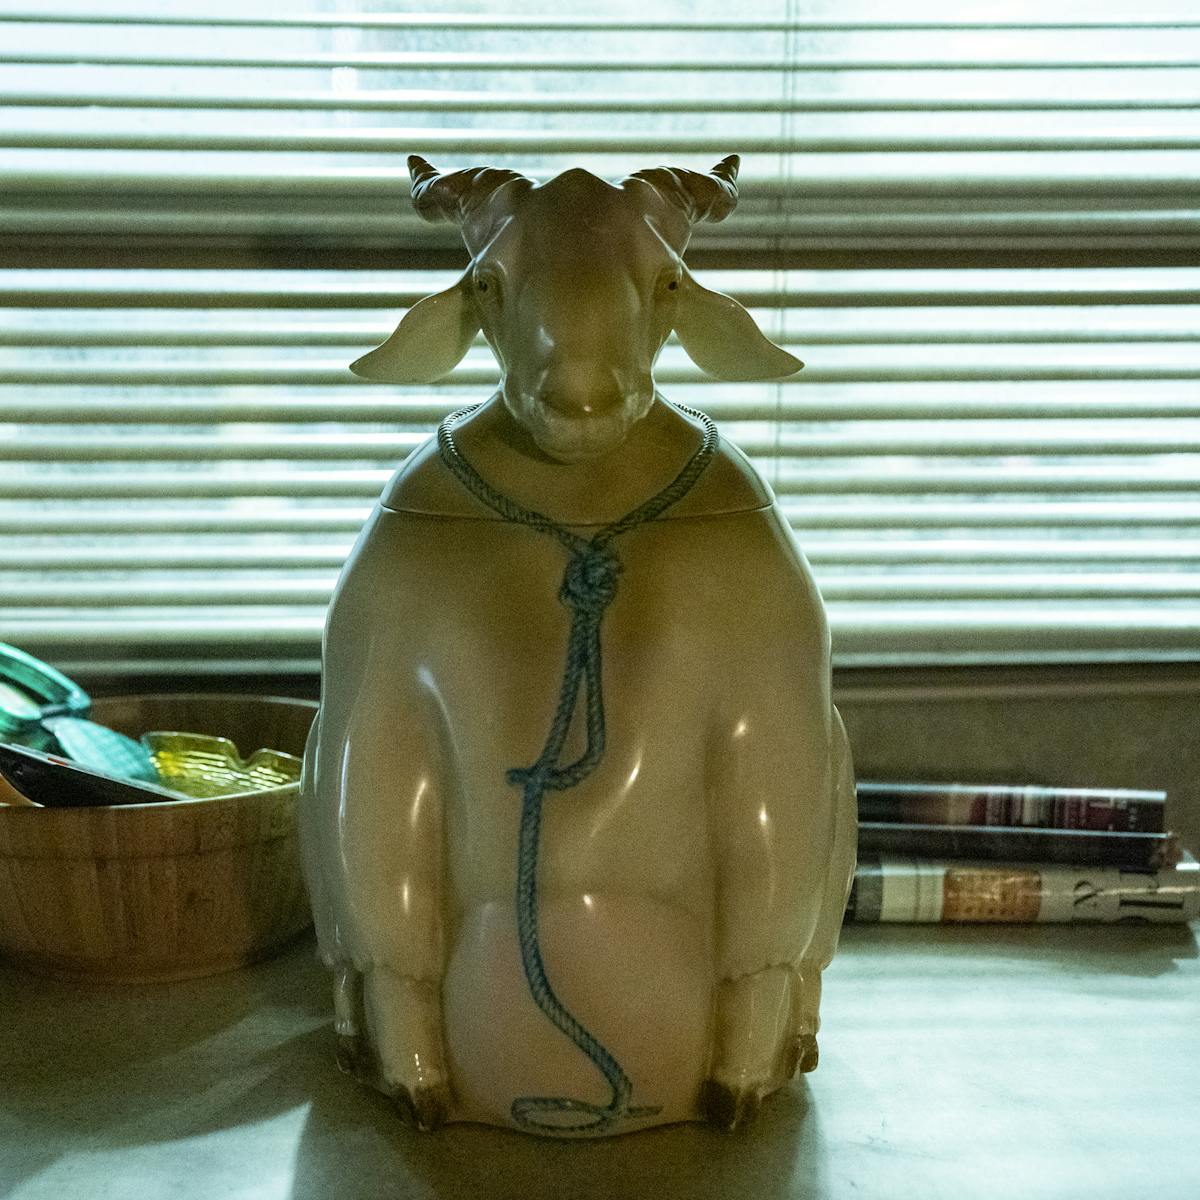 The goat cookie jar.